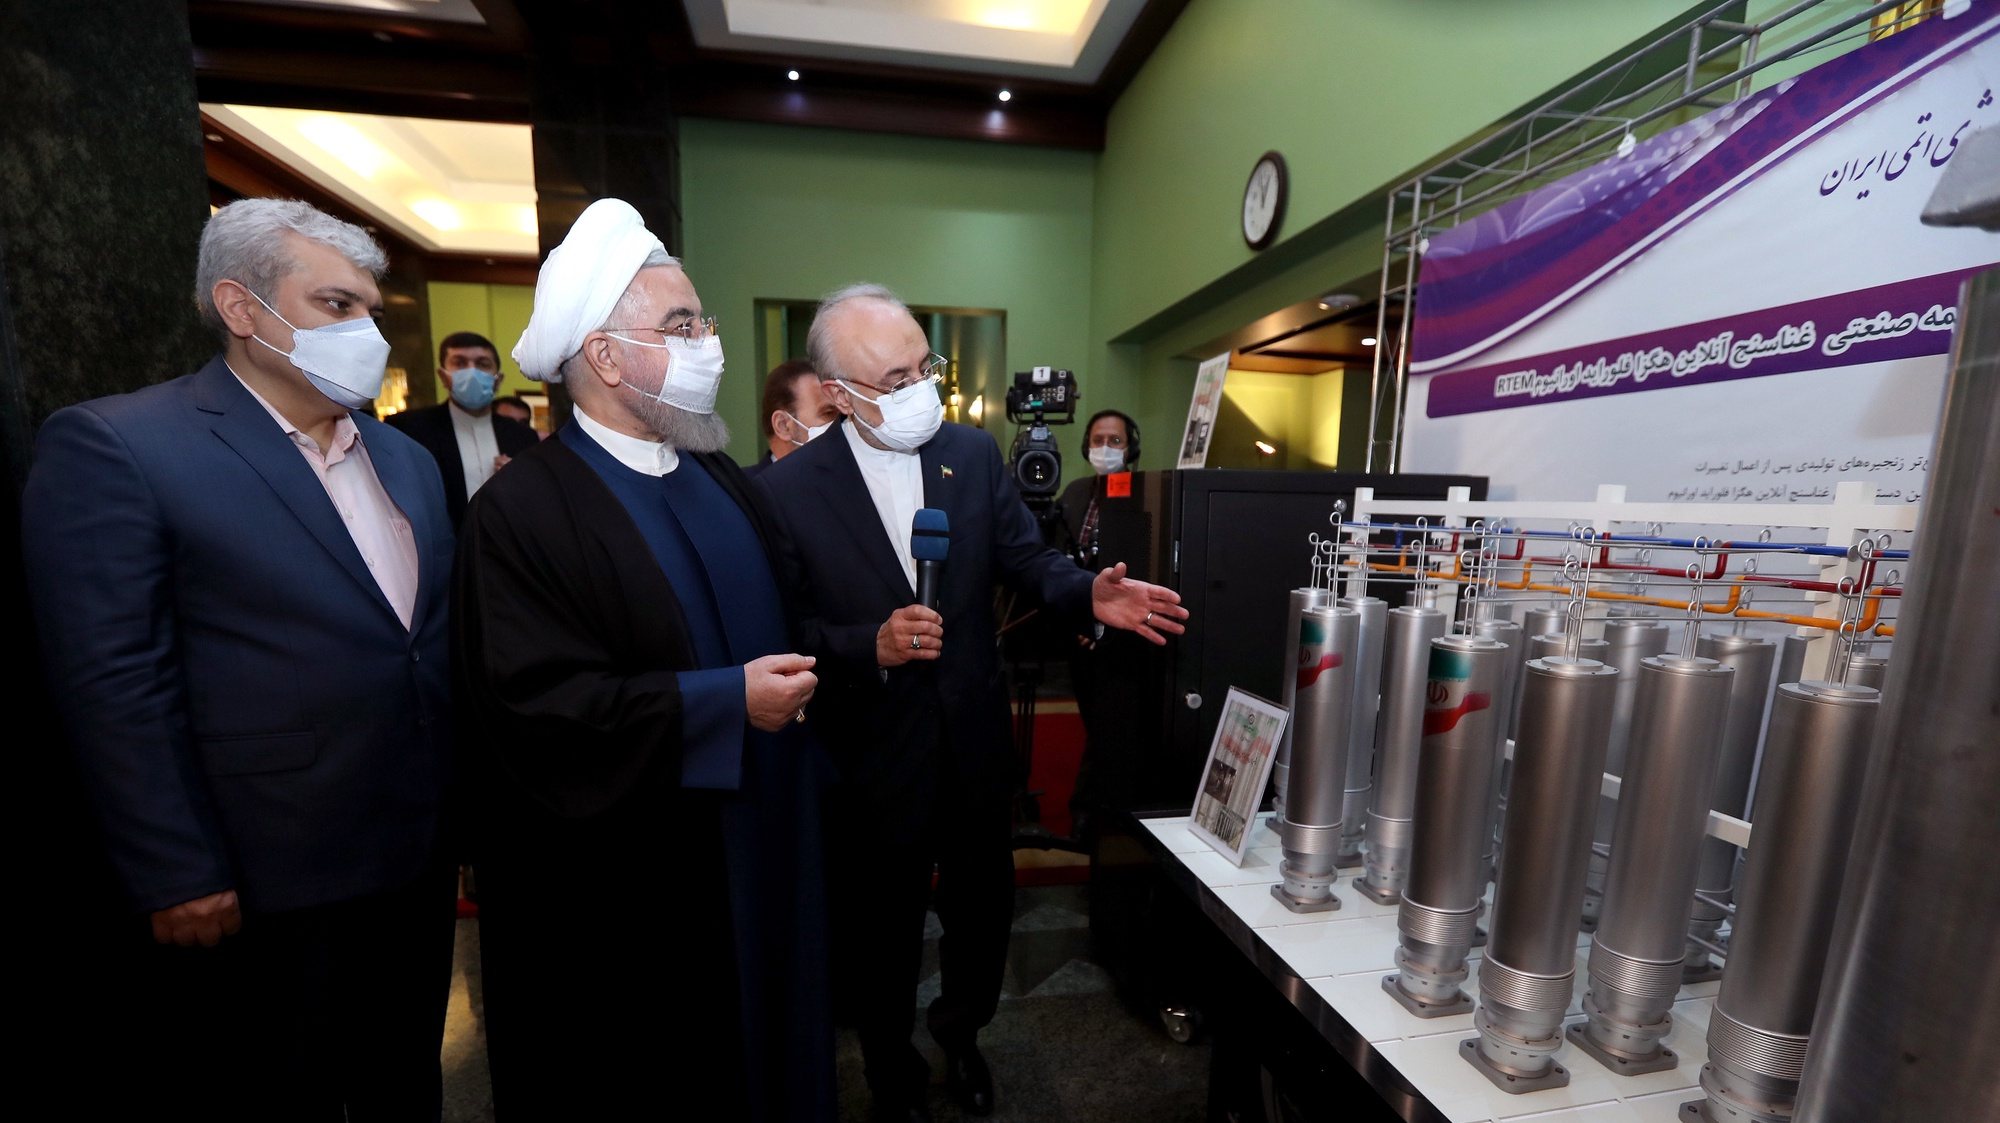 epa09126292 A handout picture made available by the Iranian presidential office shows Iranian President Hassan Rouhani (C) and head of Iran&#039;s nuclear organization Ali Akbar Salehi (R) visits an exhibition of nuclear achievement on the occasion of Iran Nuclear Technology Day, in Tehran, Iran, 10 April 2021. According to Isna news agency, Rouhani said that &#039;US and west owe us about nuclear deal and they must make it up&#039;, referring to the sanctions against the country over Iran&#039;s disputed nuclear programm.  EPA/IRAN PRESIDENT OFFICE HANDOUT  HANDOUT EDITORIAL USE ONLY/NO SALES